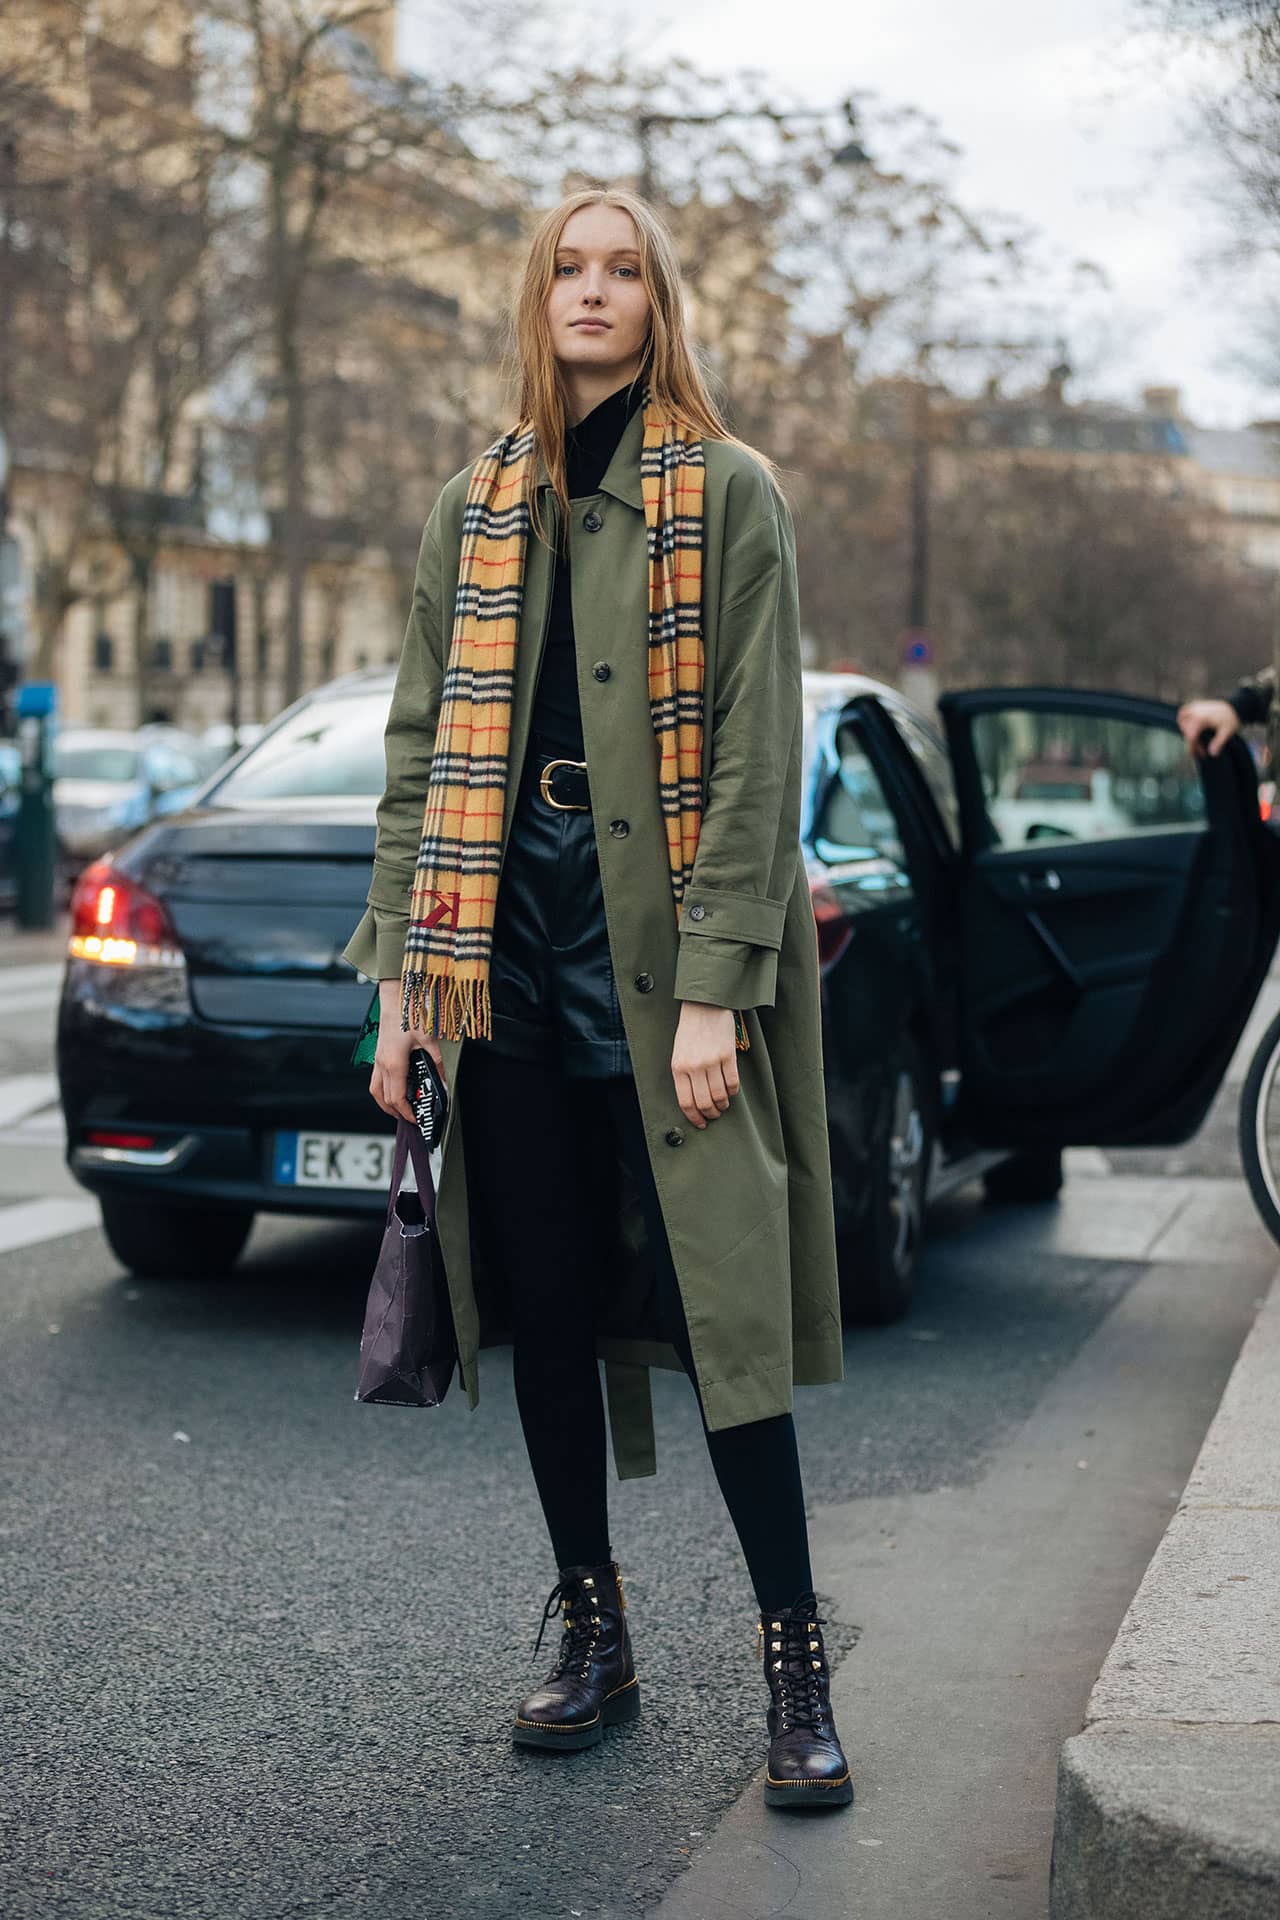 Kateryna Zub Trench Coat Outfit